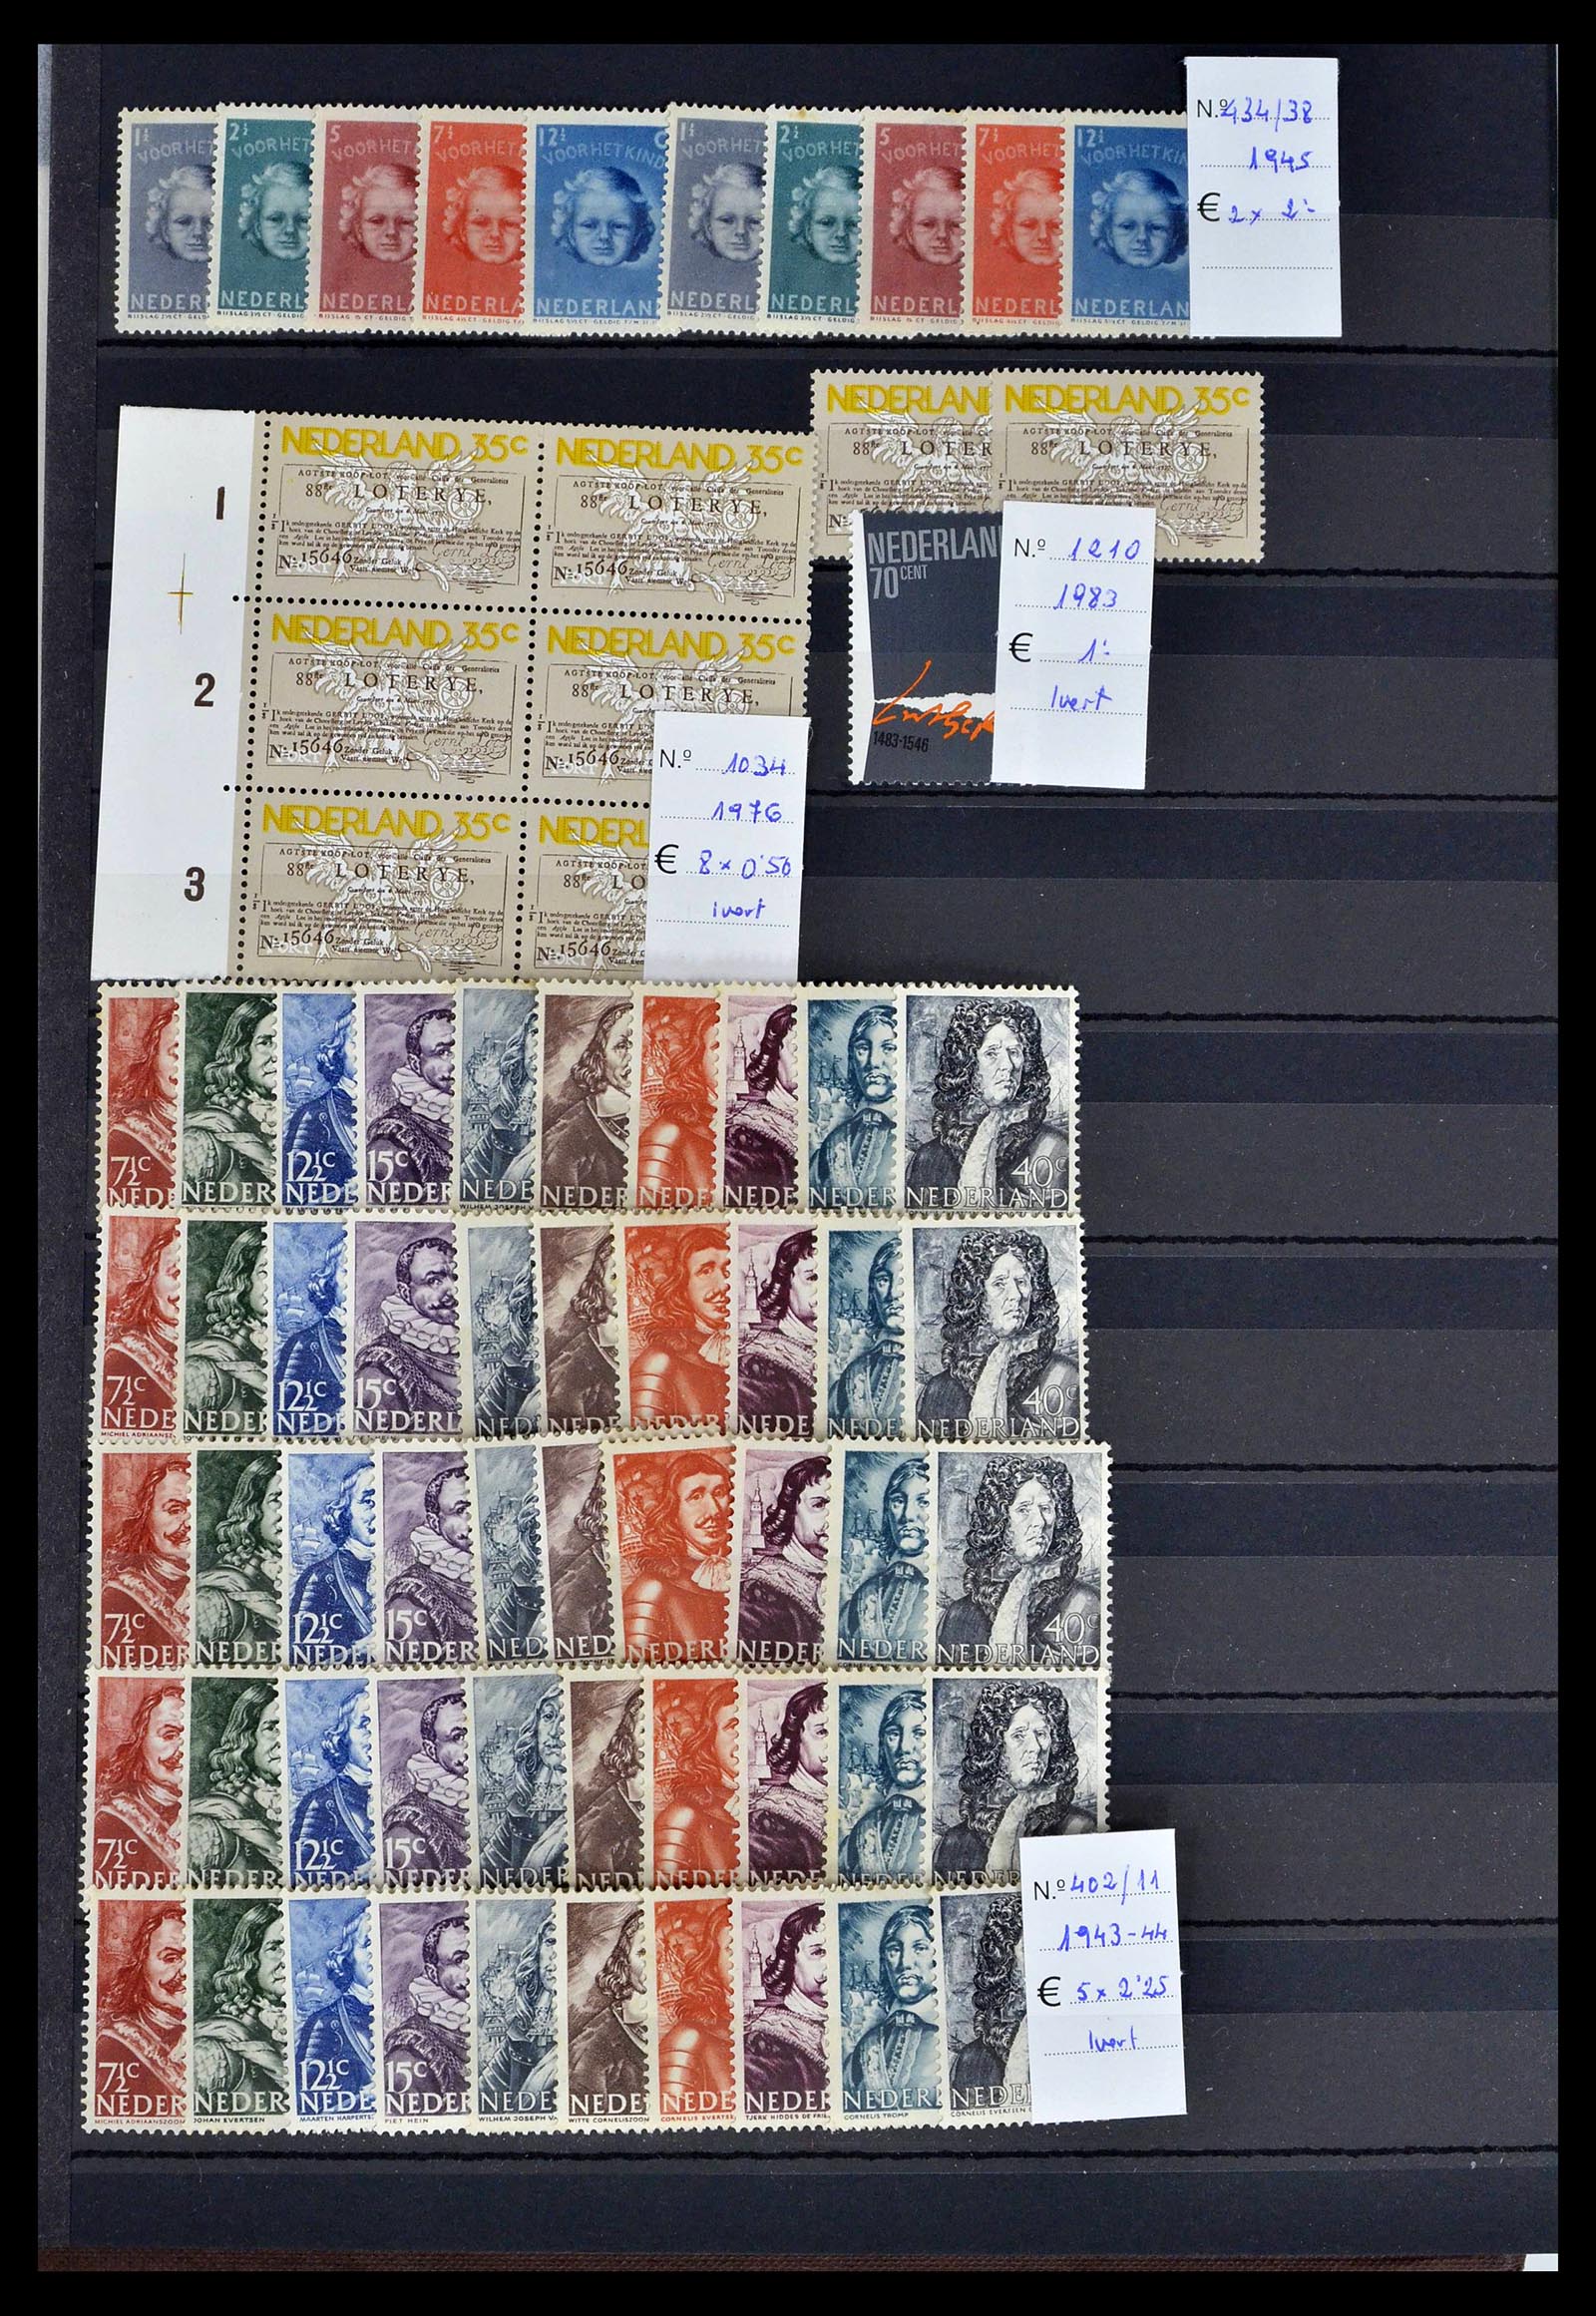 39236 0004 - Stamp collection 39236 European countries 40s-60s.